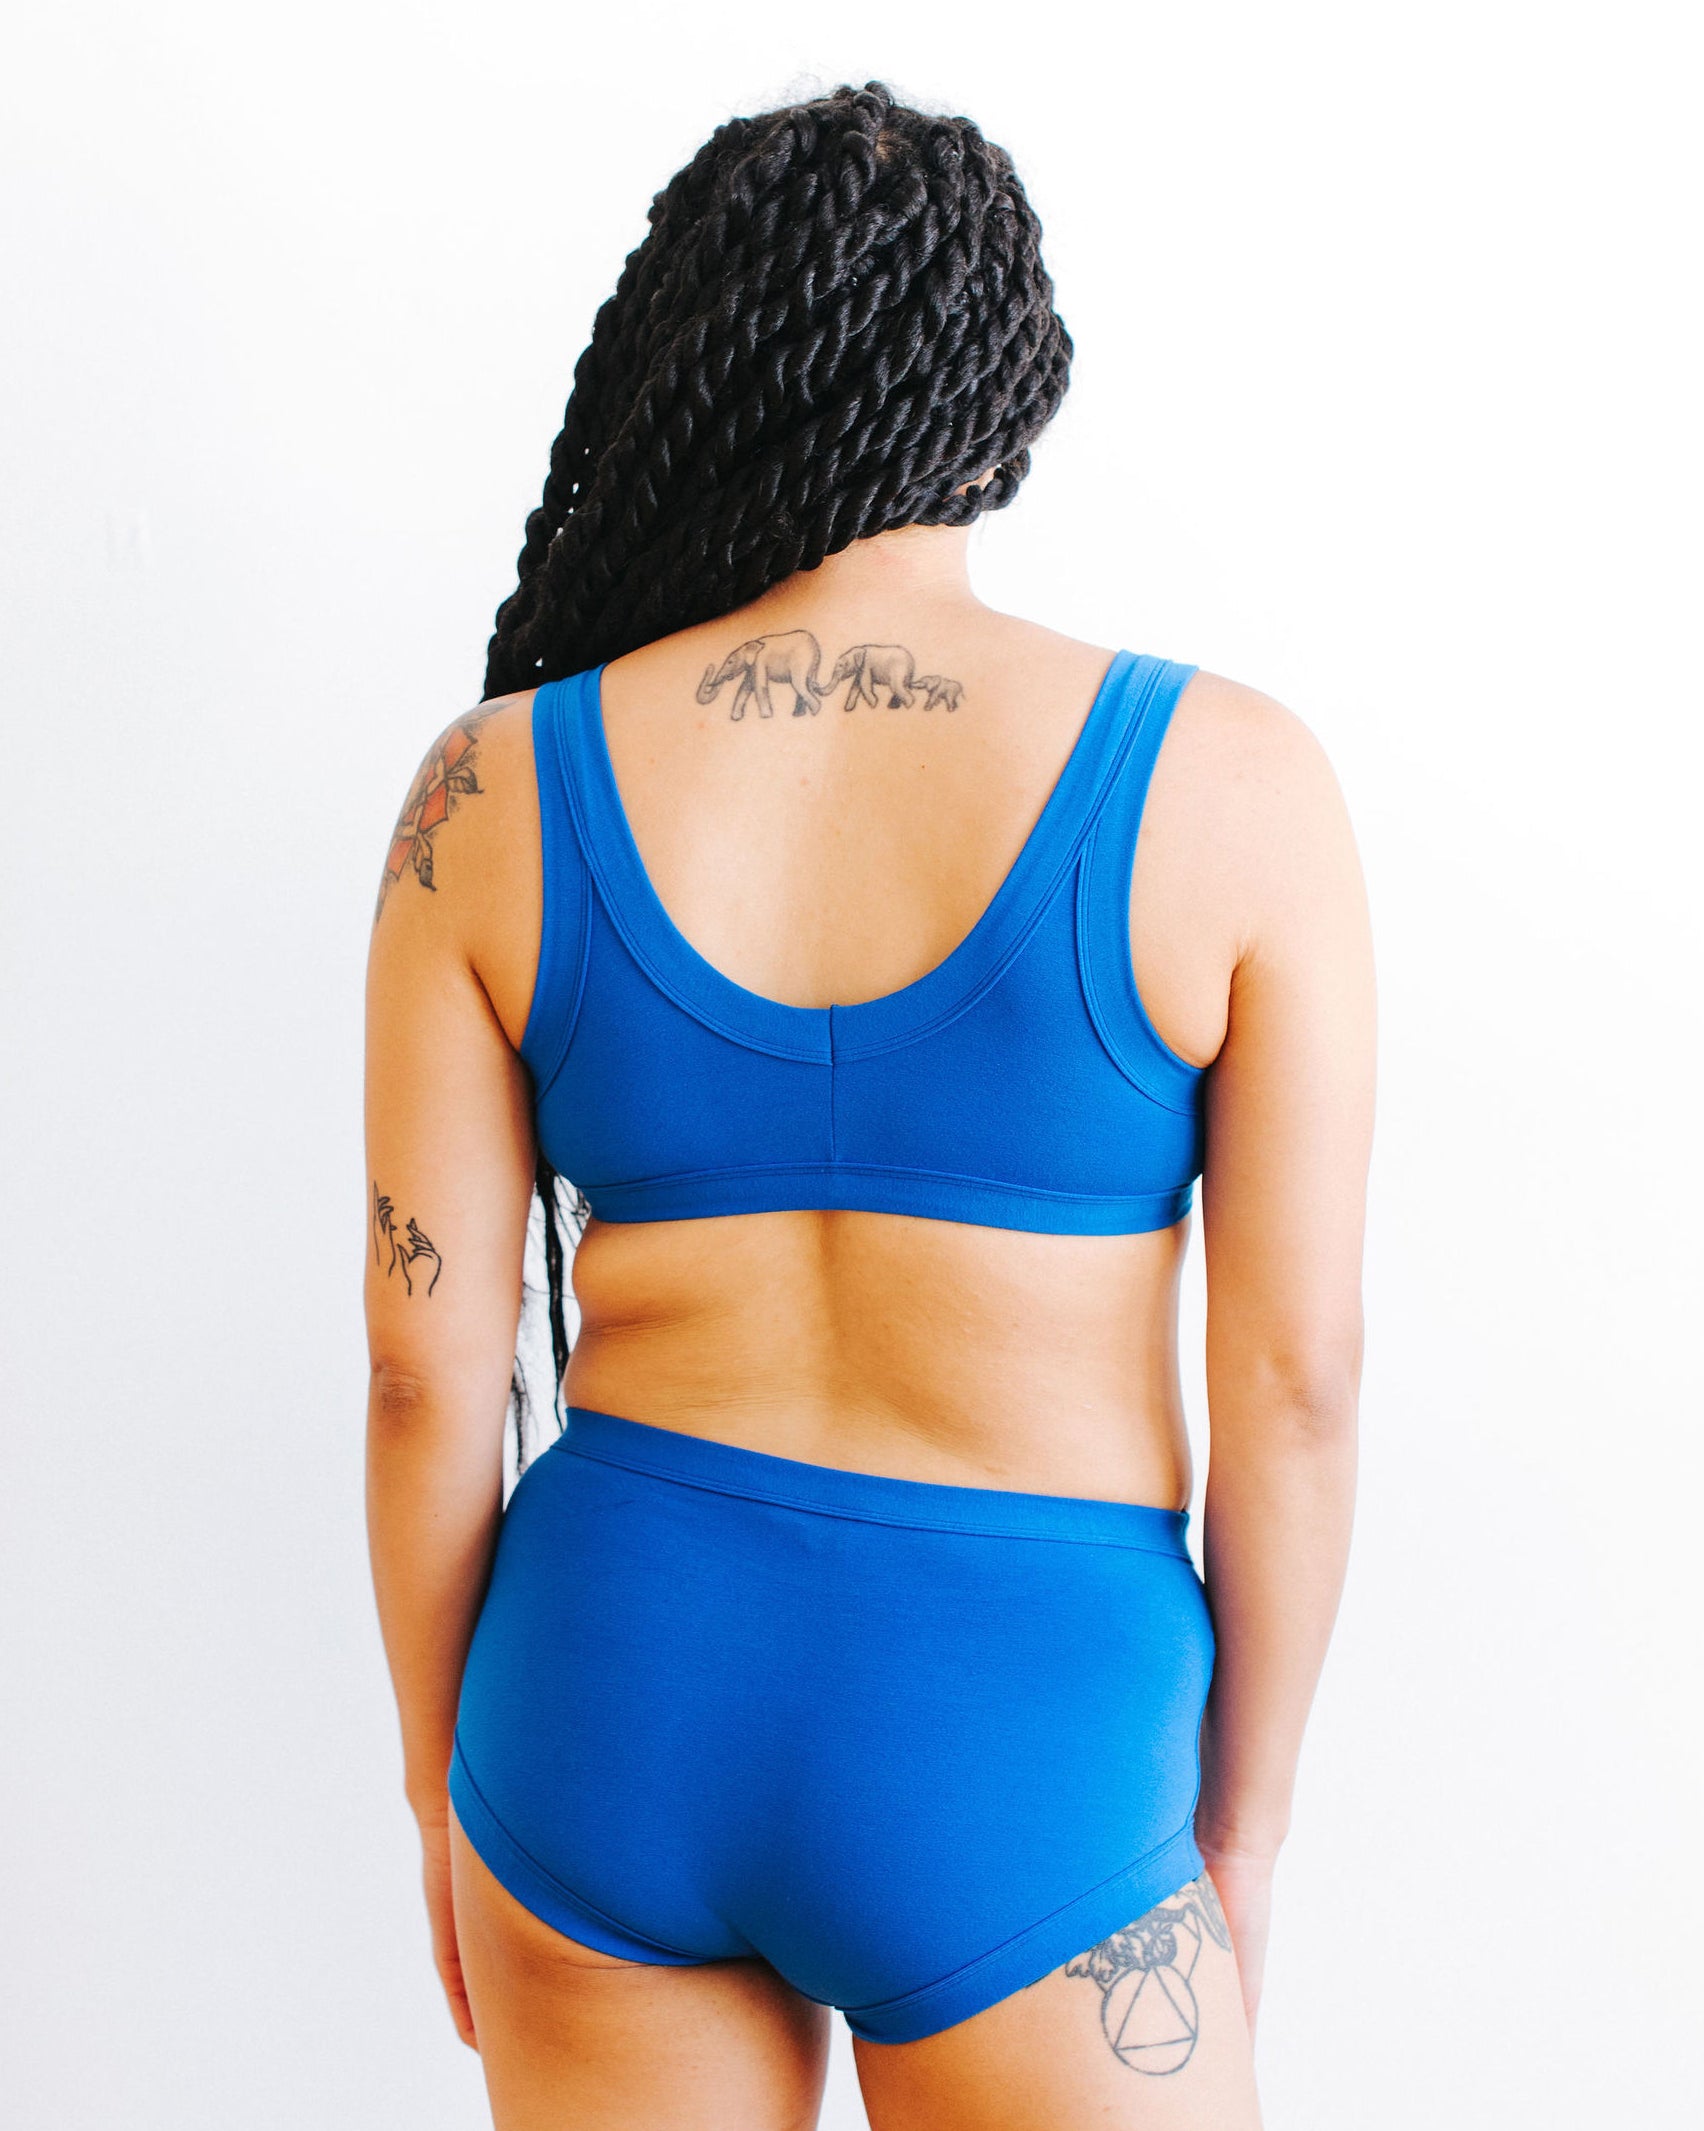 Back of model wearing Thunderpants Bralette and underwear set in Blueberry Blue.